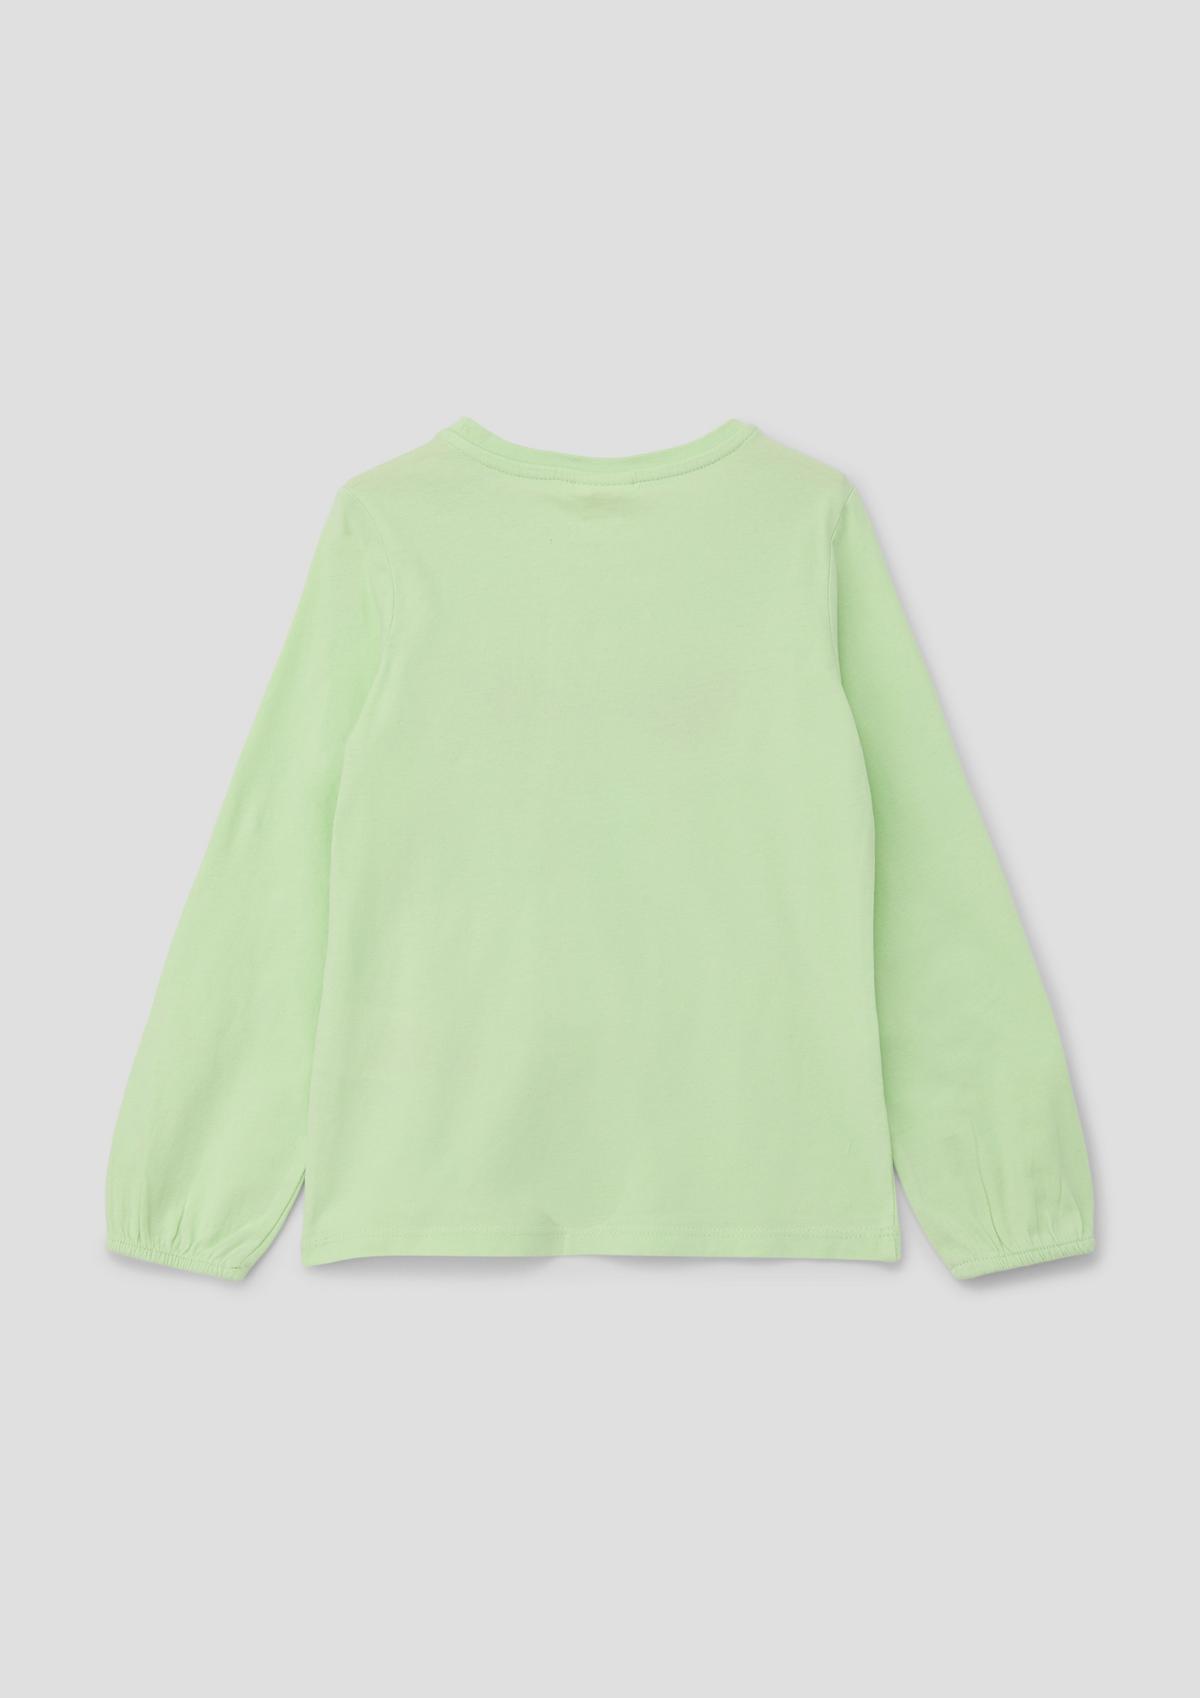 s.Oliver Long sleeve top with a round neckline